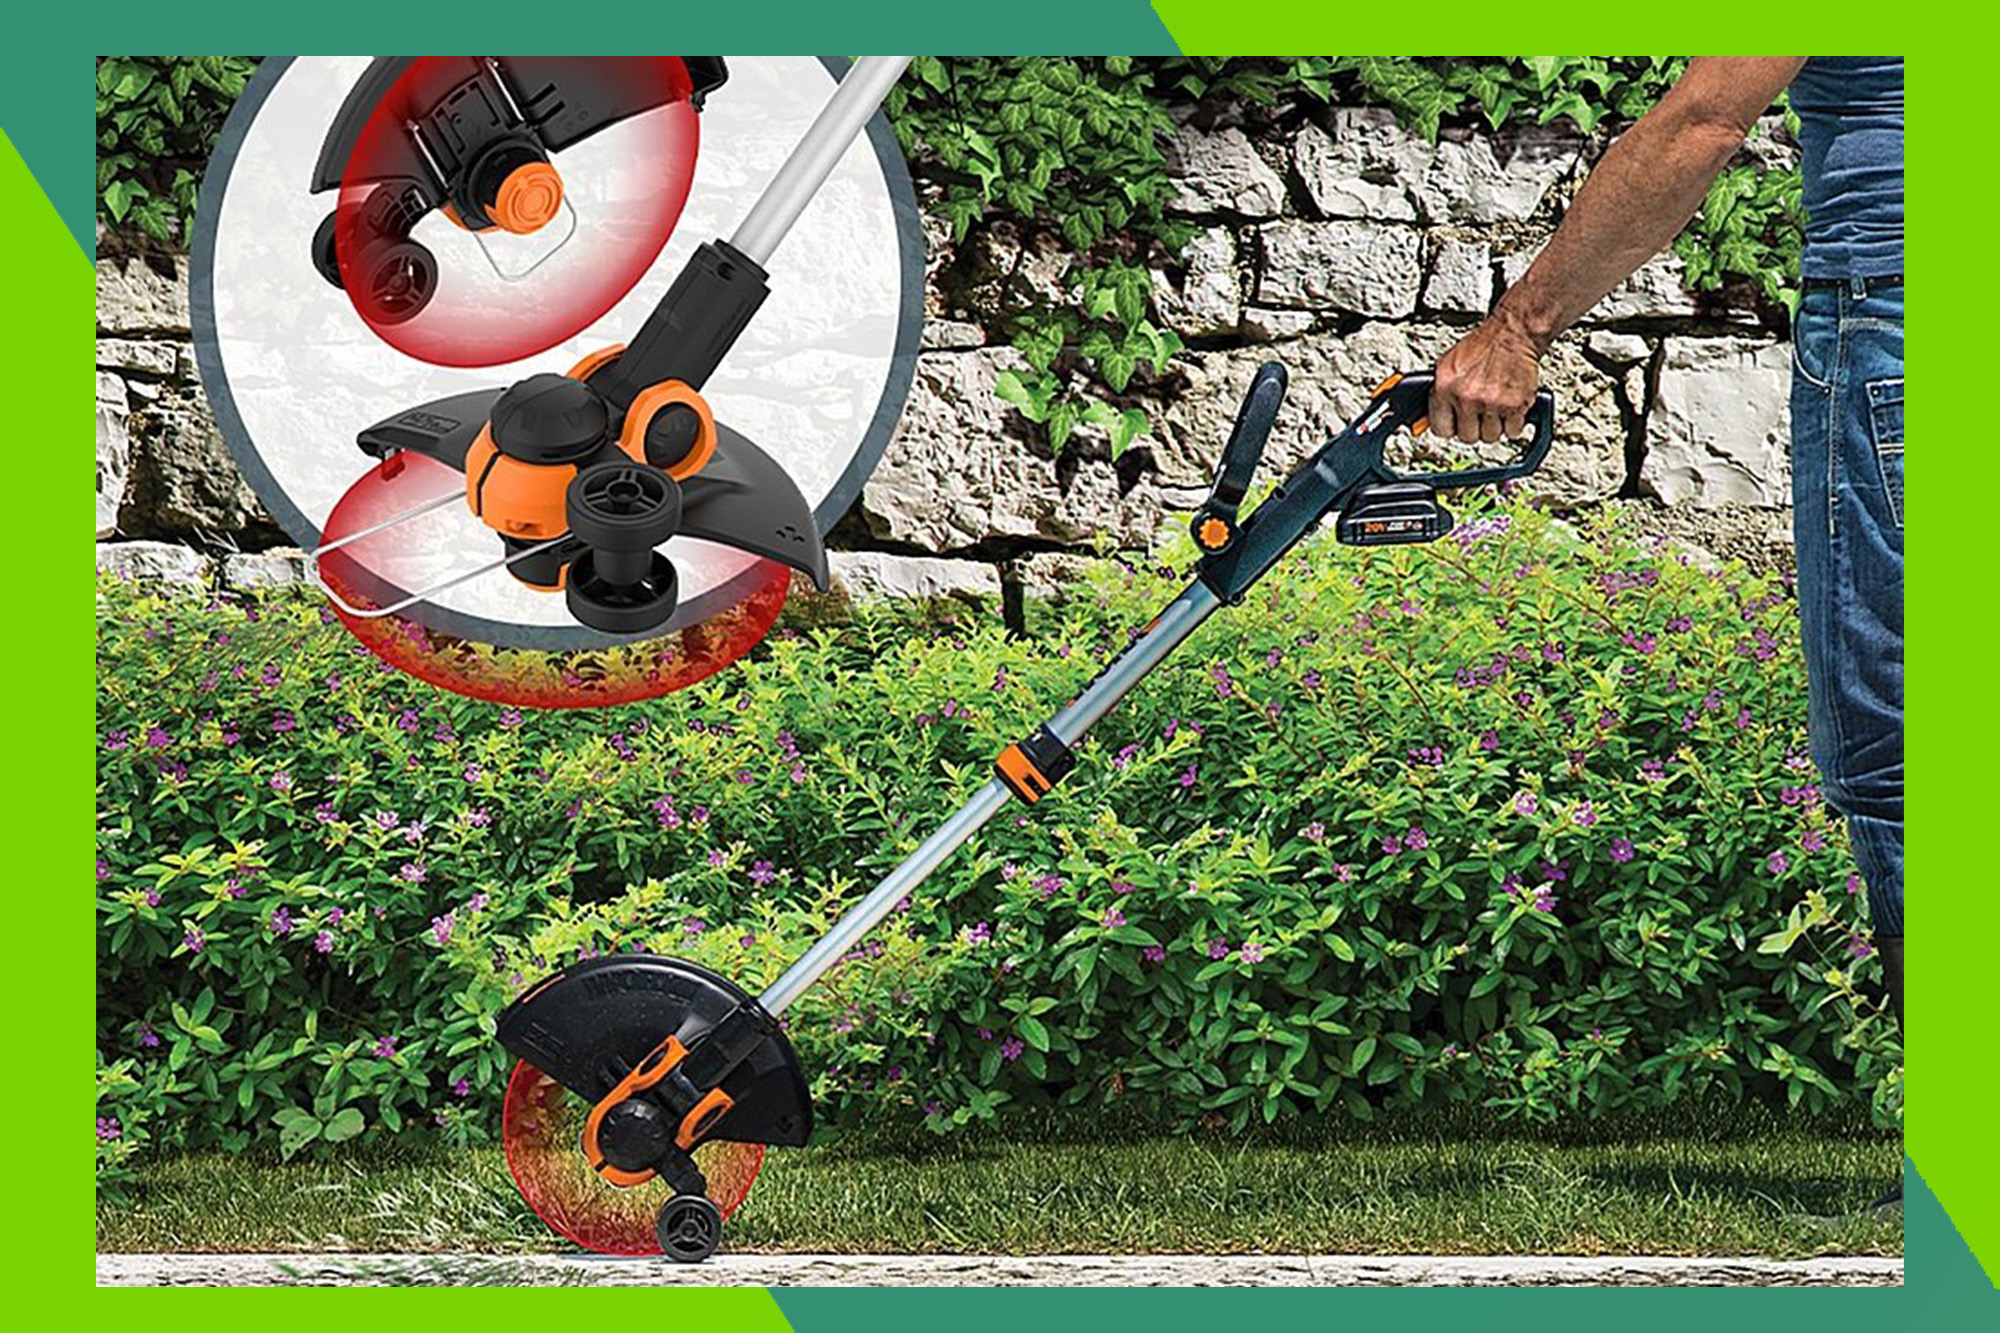 Weed it and reap! This cordless Worx Edger & Weed Trimmer is 30% off today on Amazon